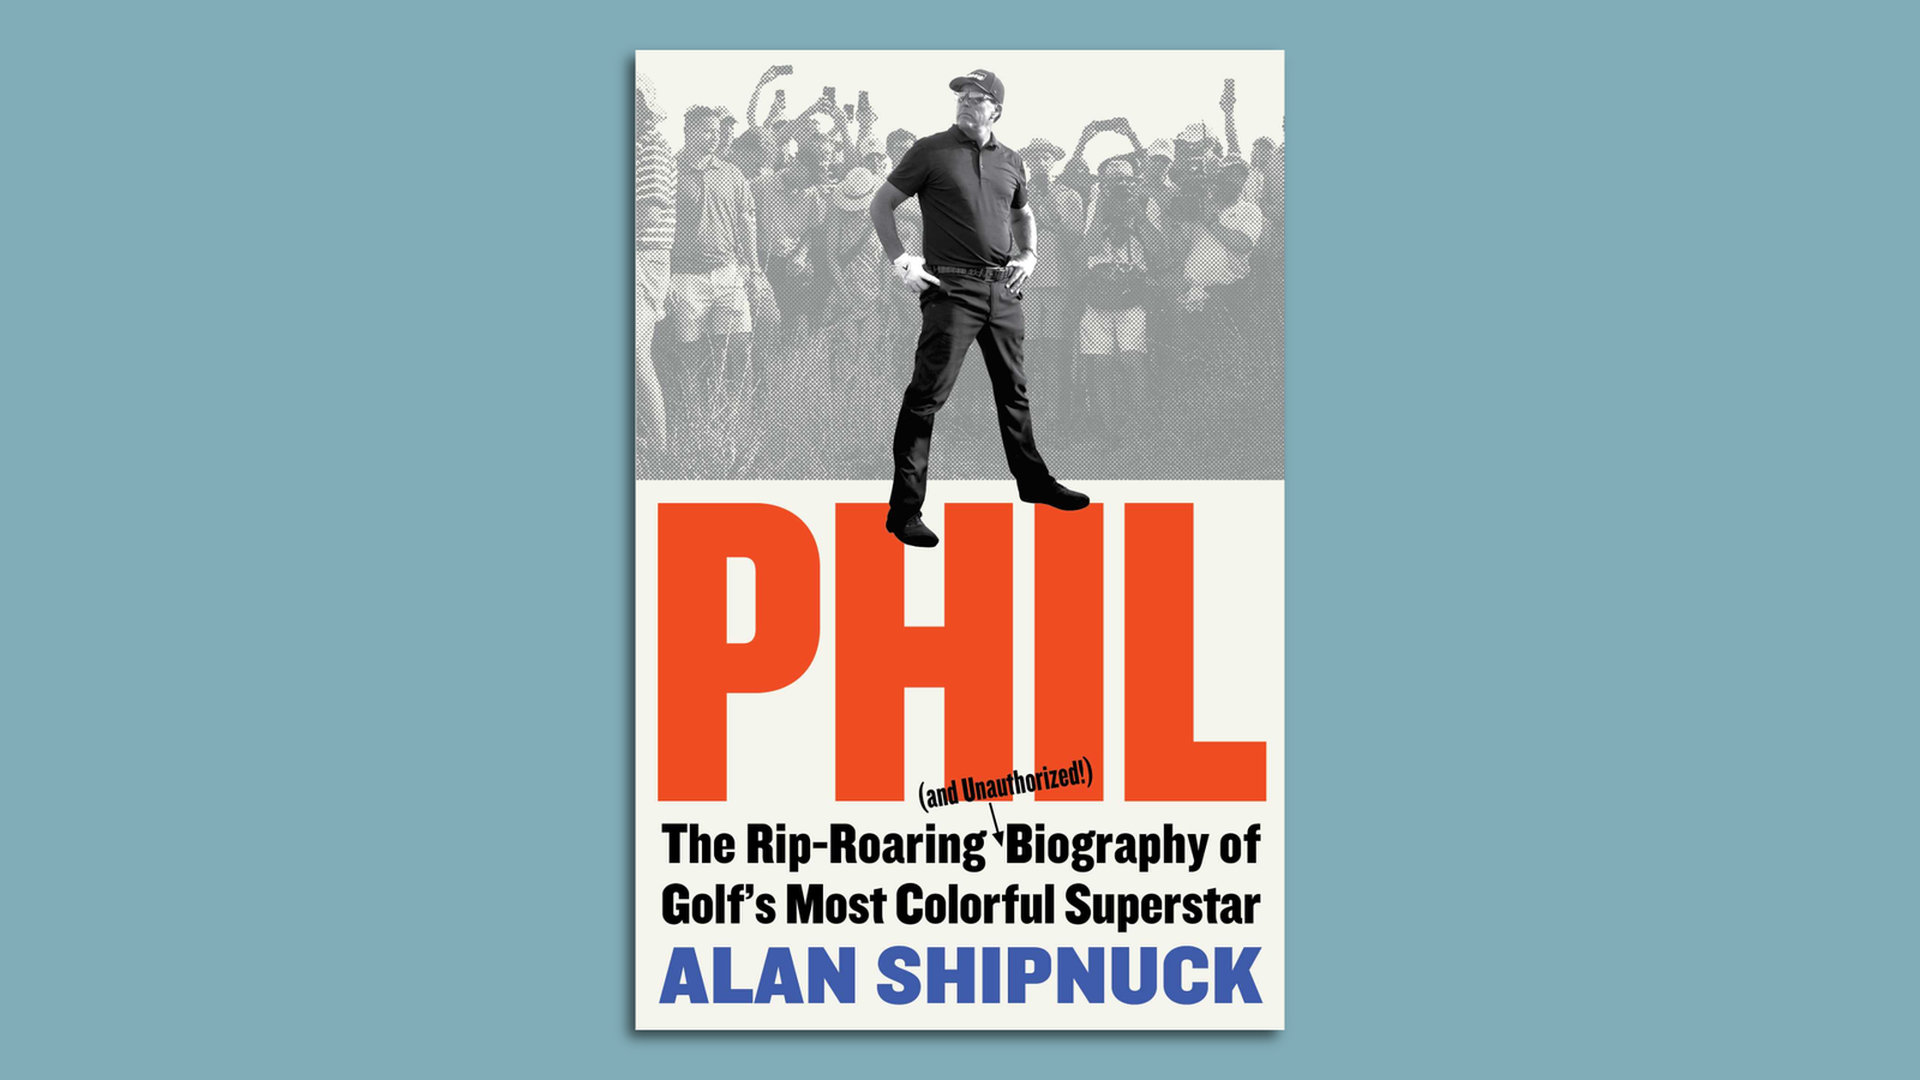 The cover of "Phil" by Alan Shipnuck